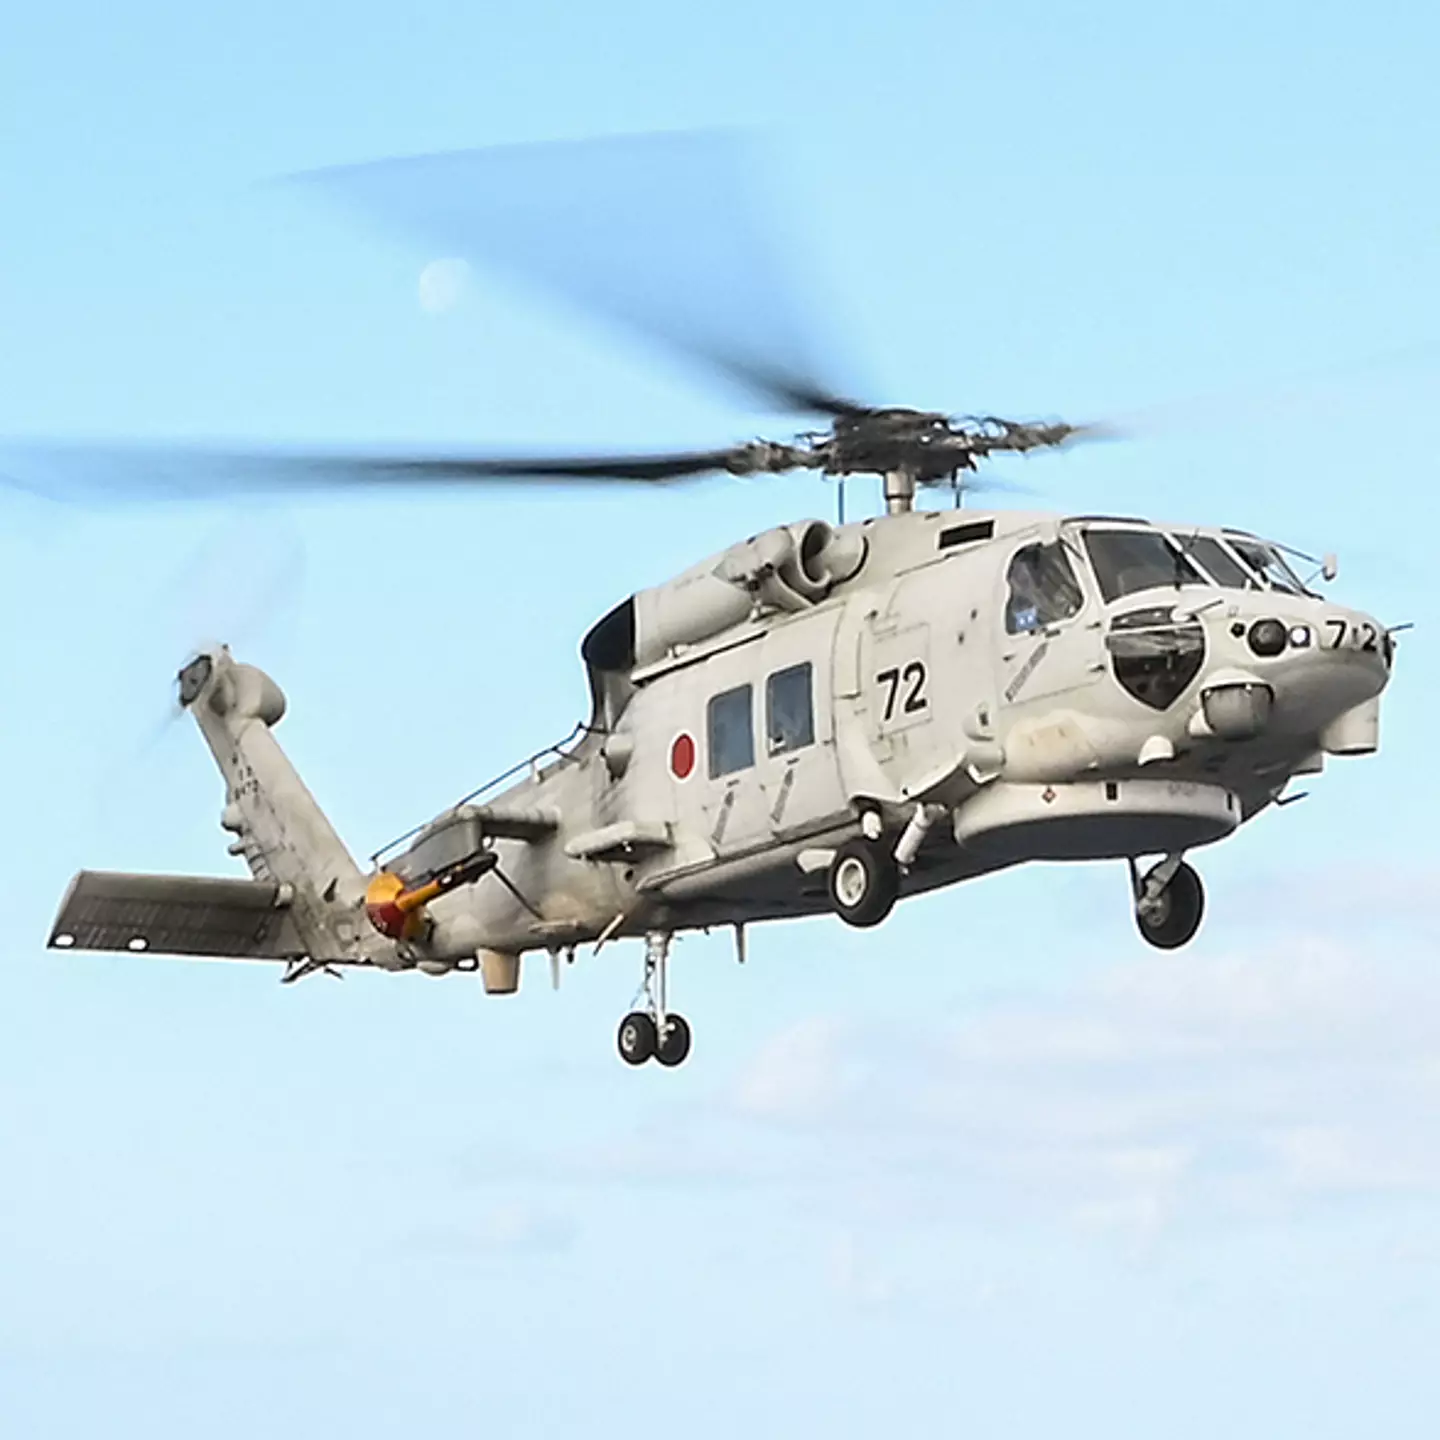 2 Japanese navy helicopters with 8 crew crash in the Pacific Ocean during nighttime training